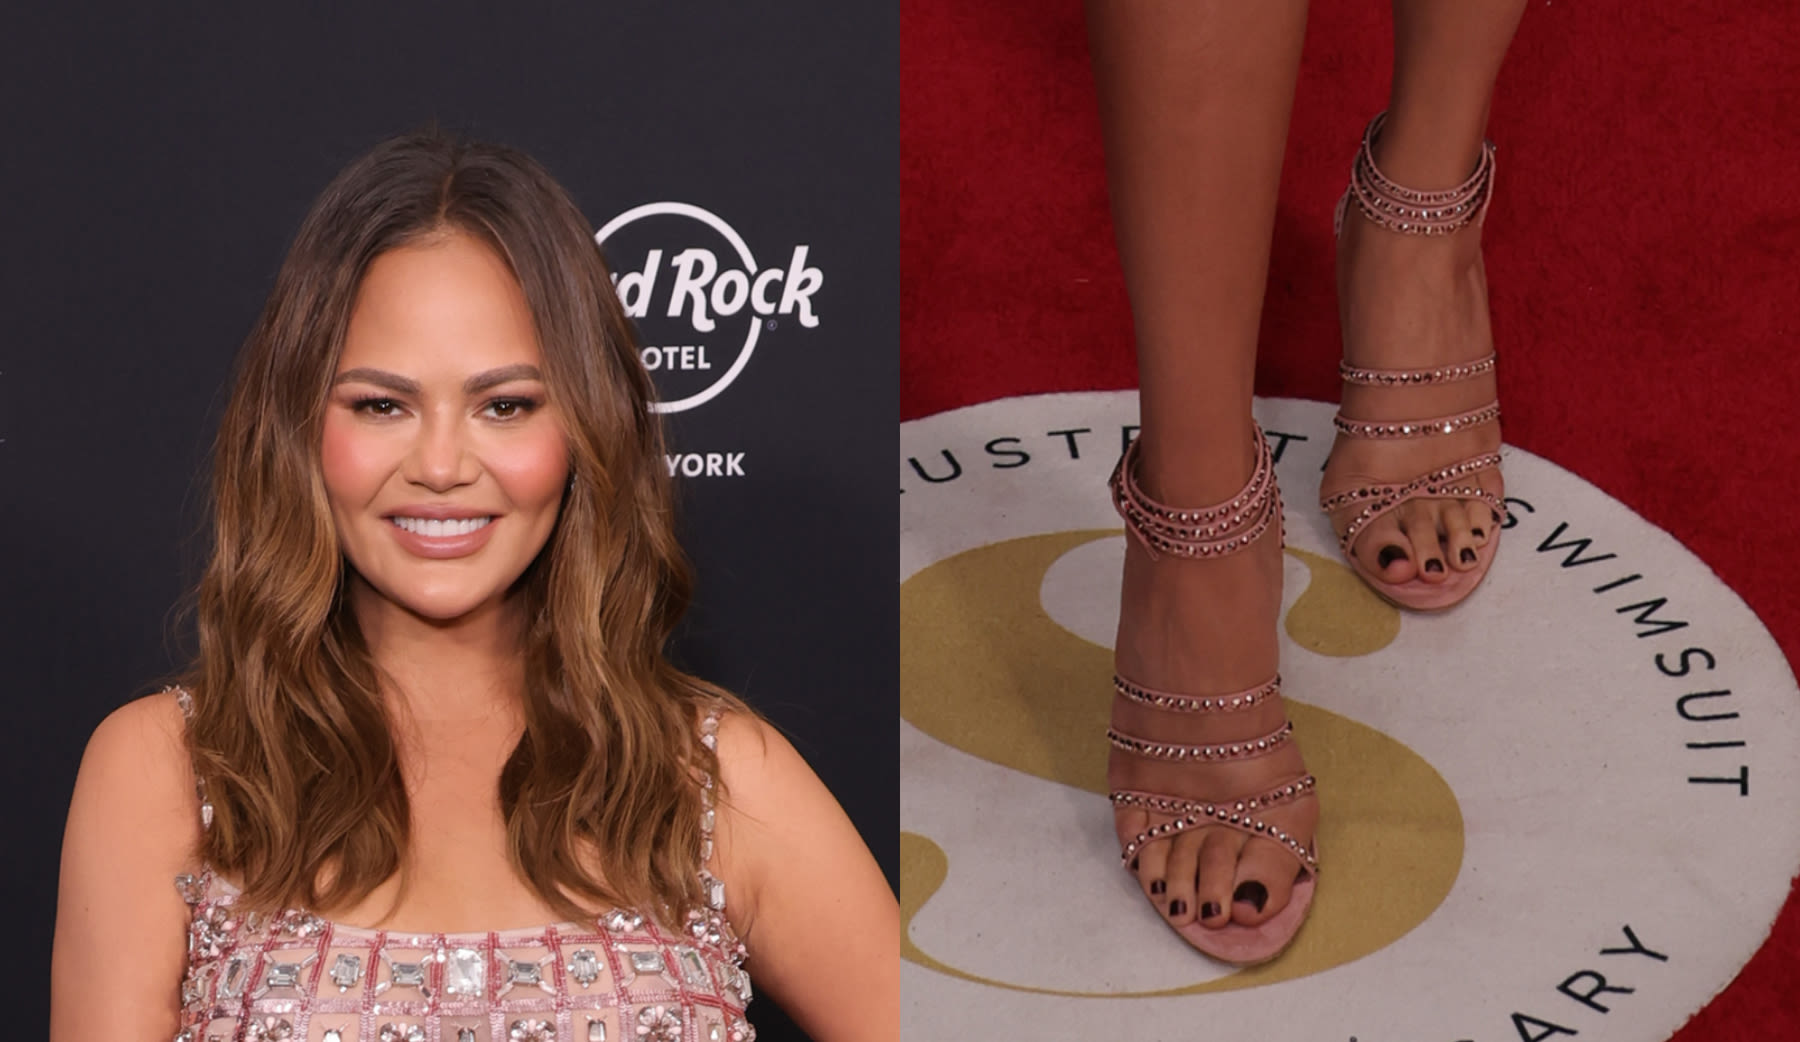 Chrissy Teigen Sparkles In Paris Texas Shoes at Sports Illustrated Swim Issue Launch Party